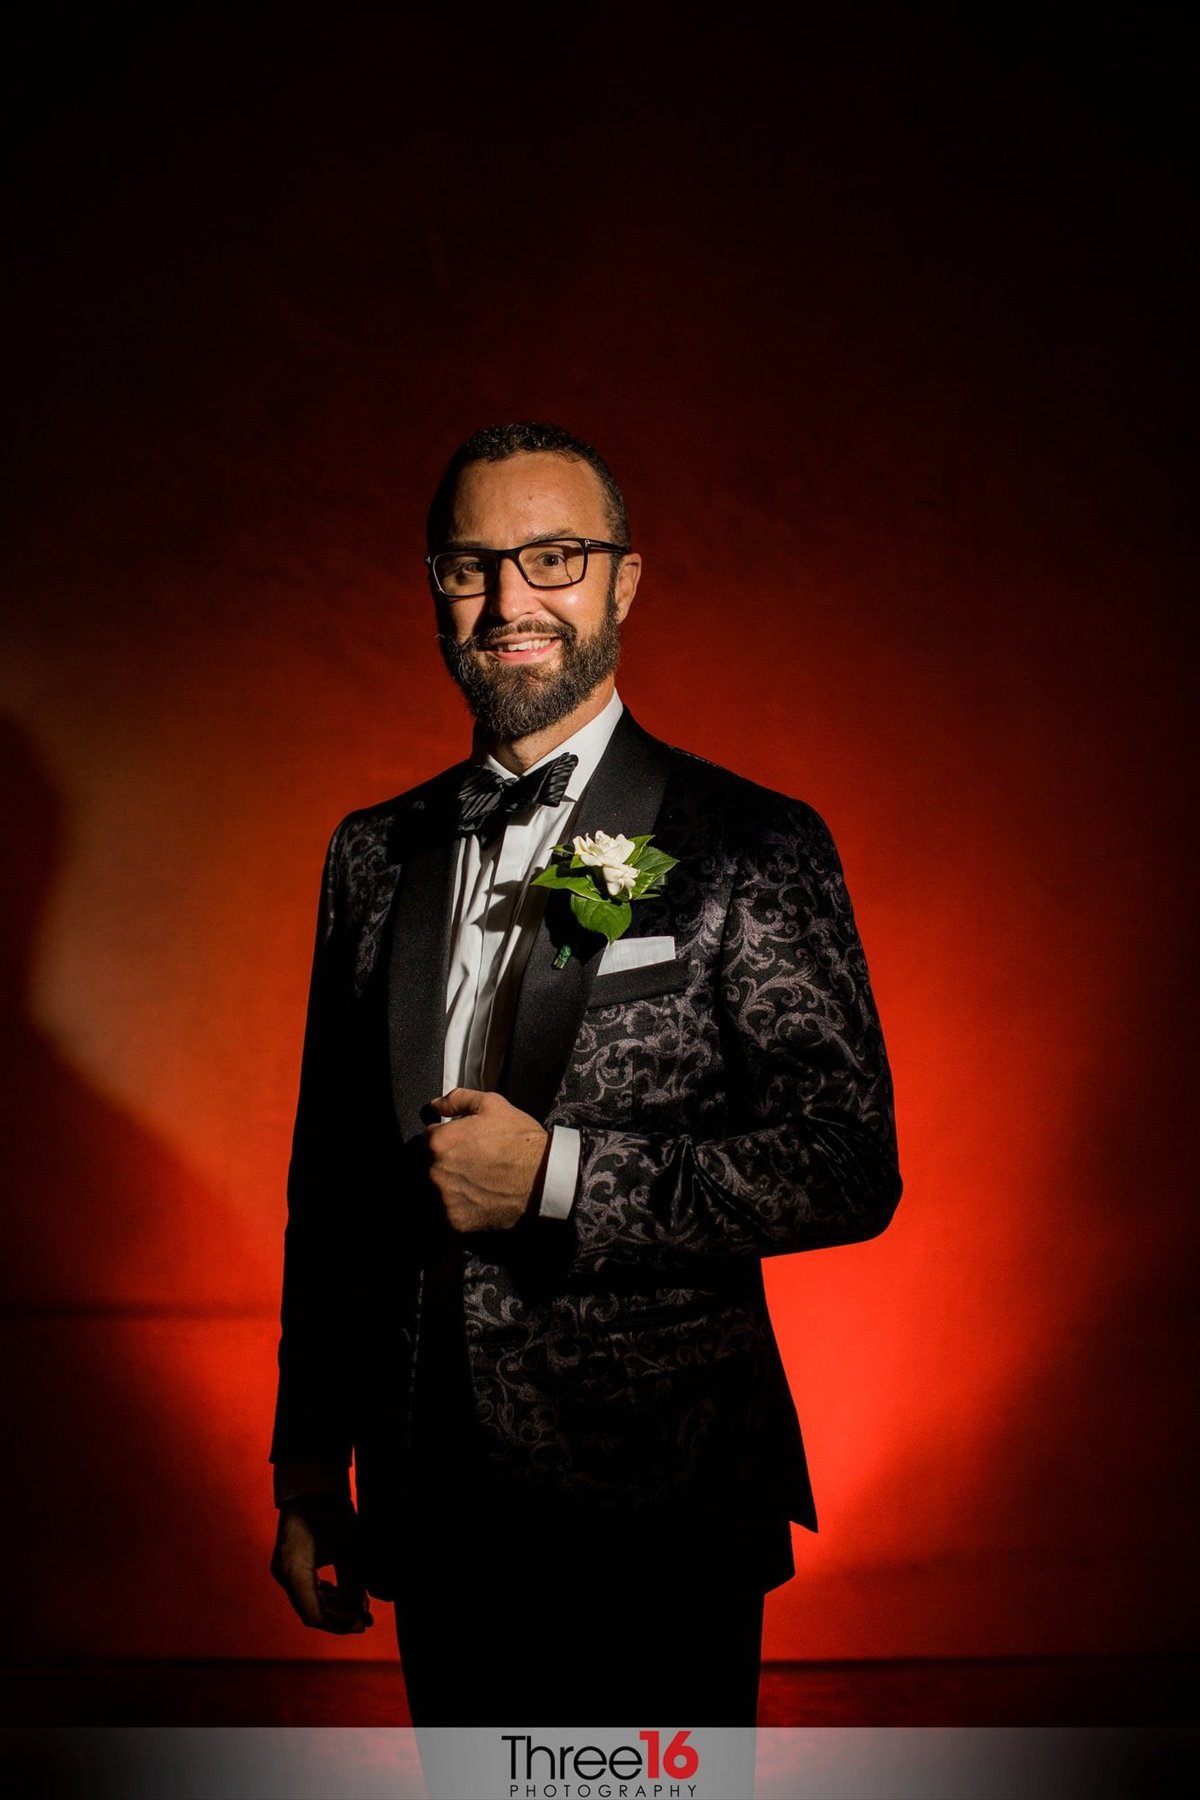 Groom poses with a red backdrop behind him